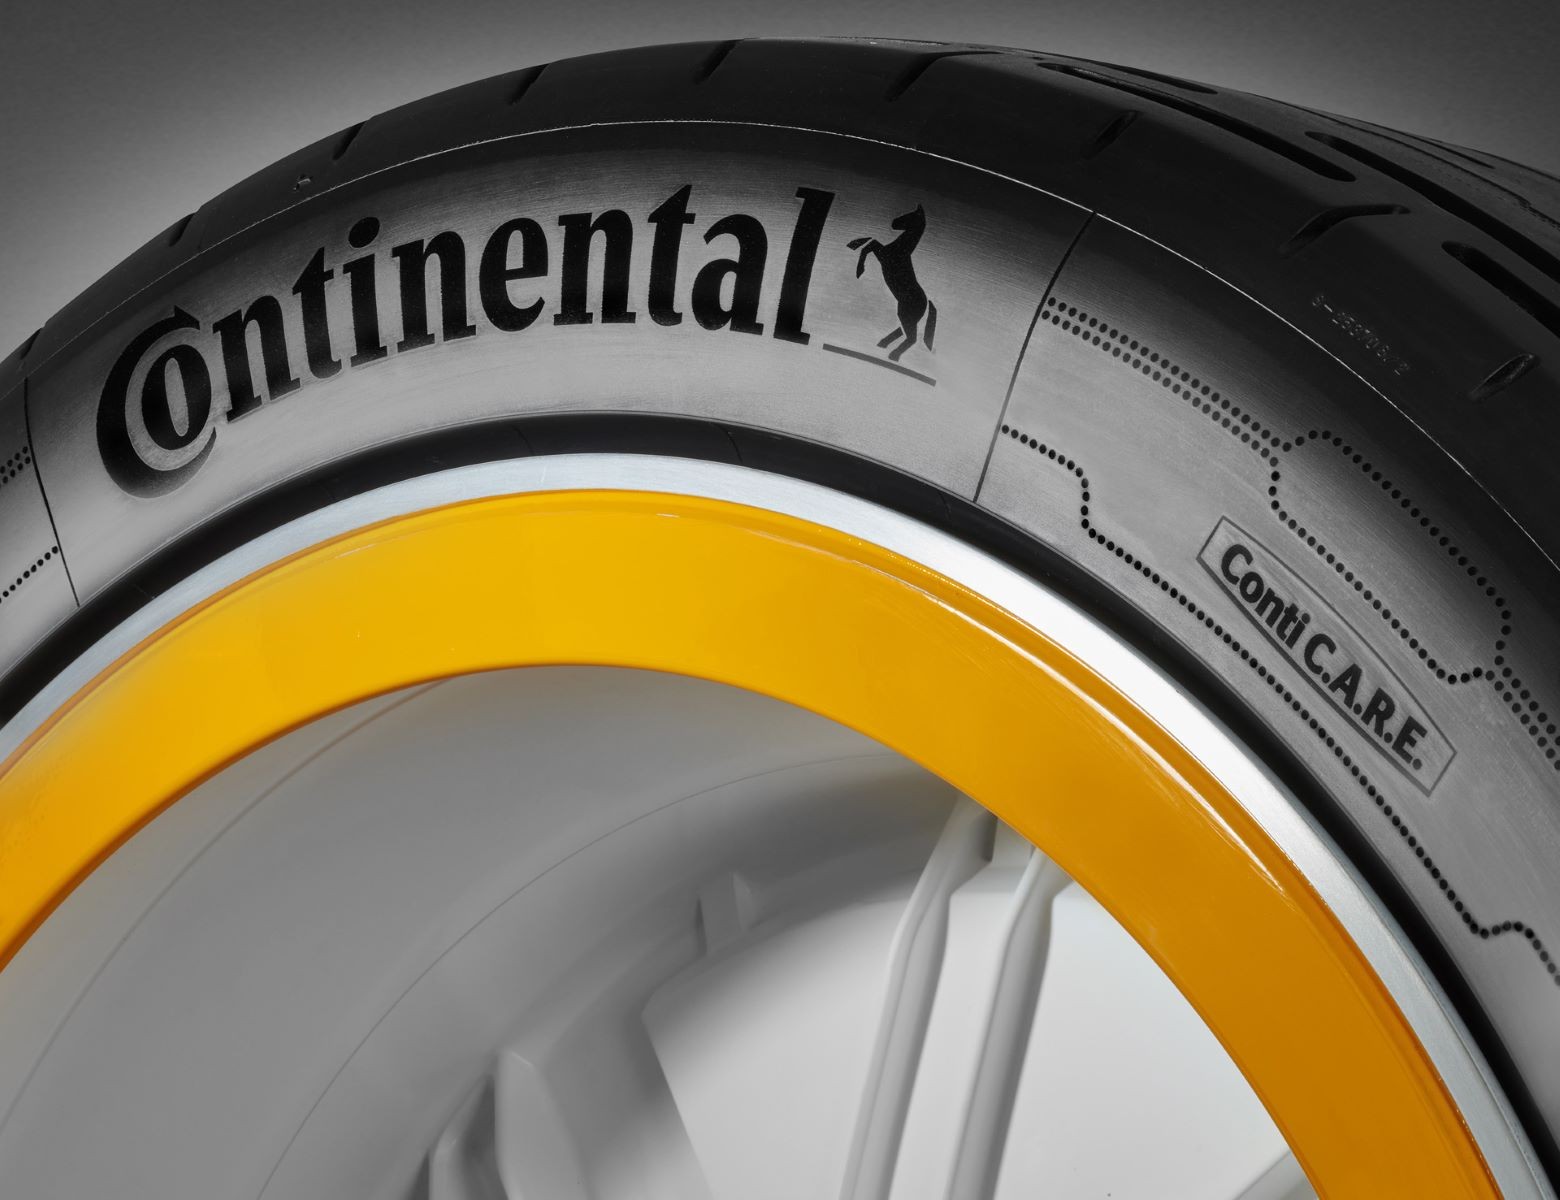 Continental car tyres